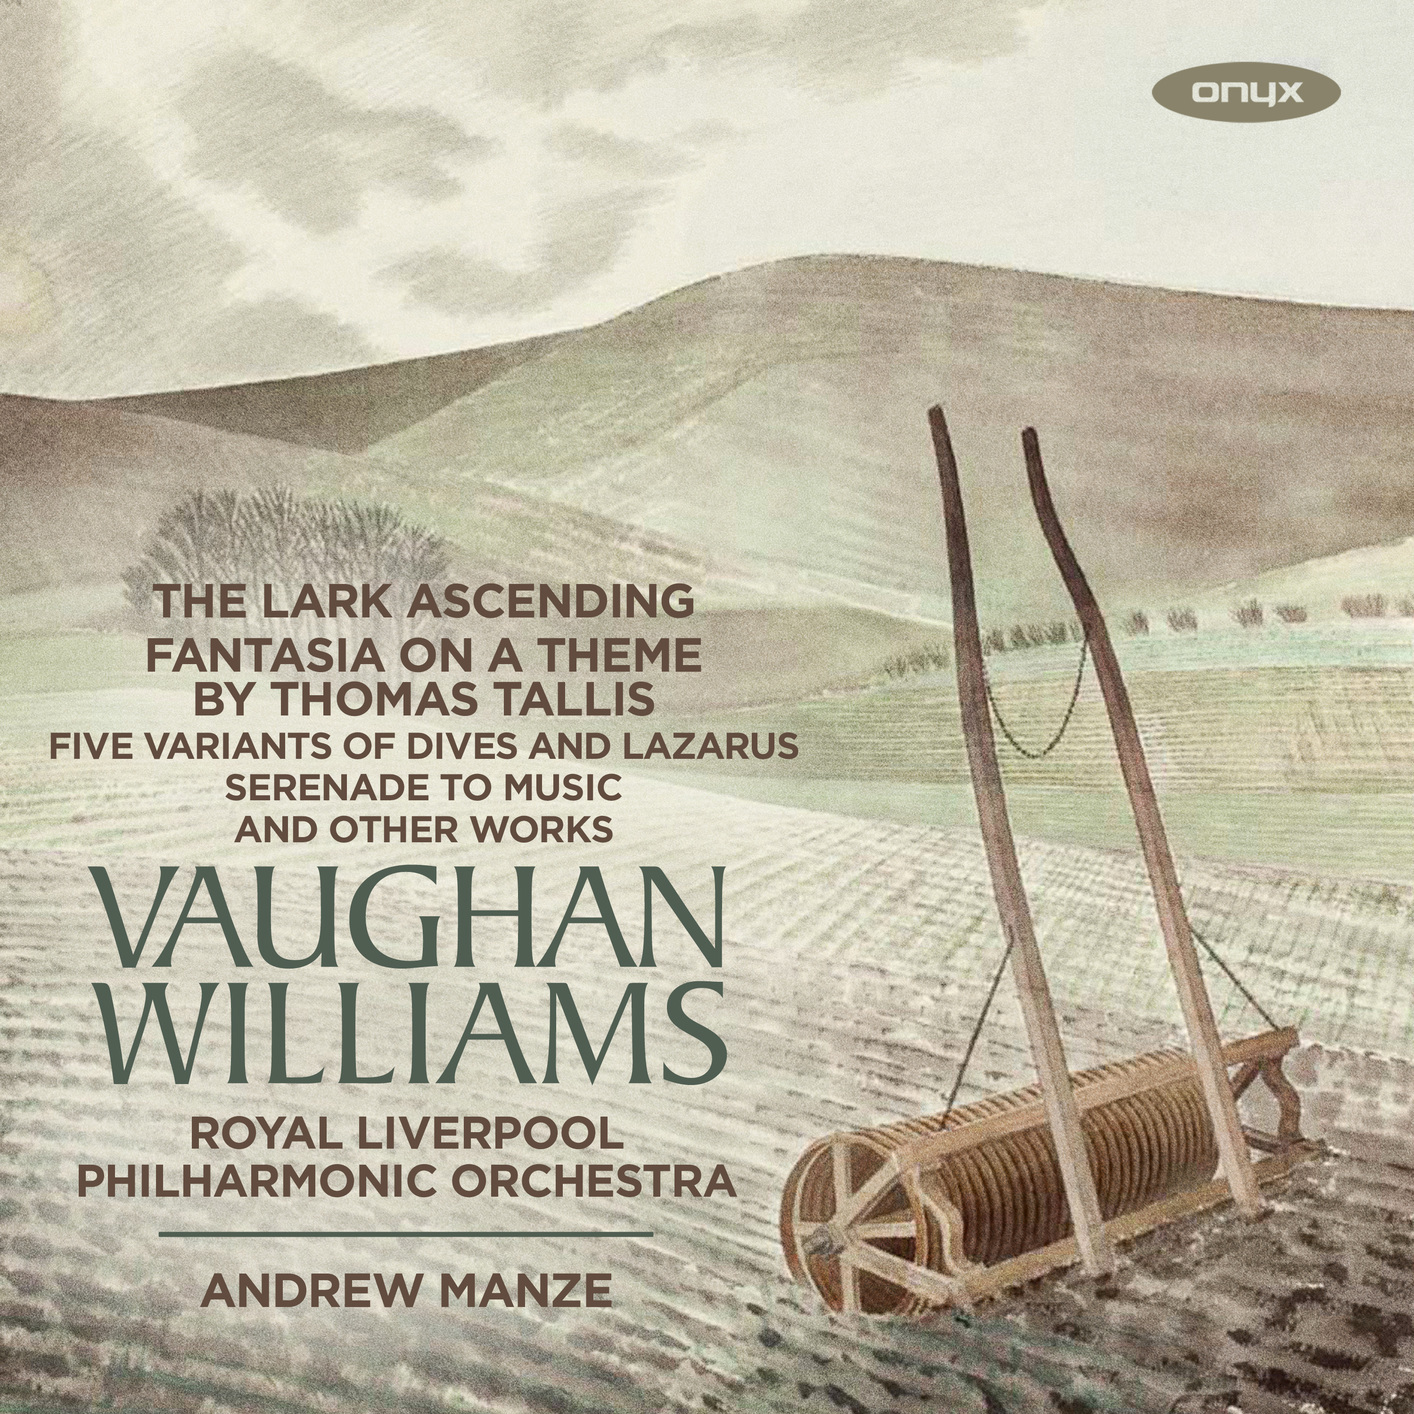 Royal Liverpool Philharmonic Orchestra & Andrew Manze - Vaughan Williams: The Lark Ascending, Fantasia on a Theme by Thomas Tallis and Other Works (2019) [FLAC 24bit/96kHz]